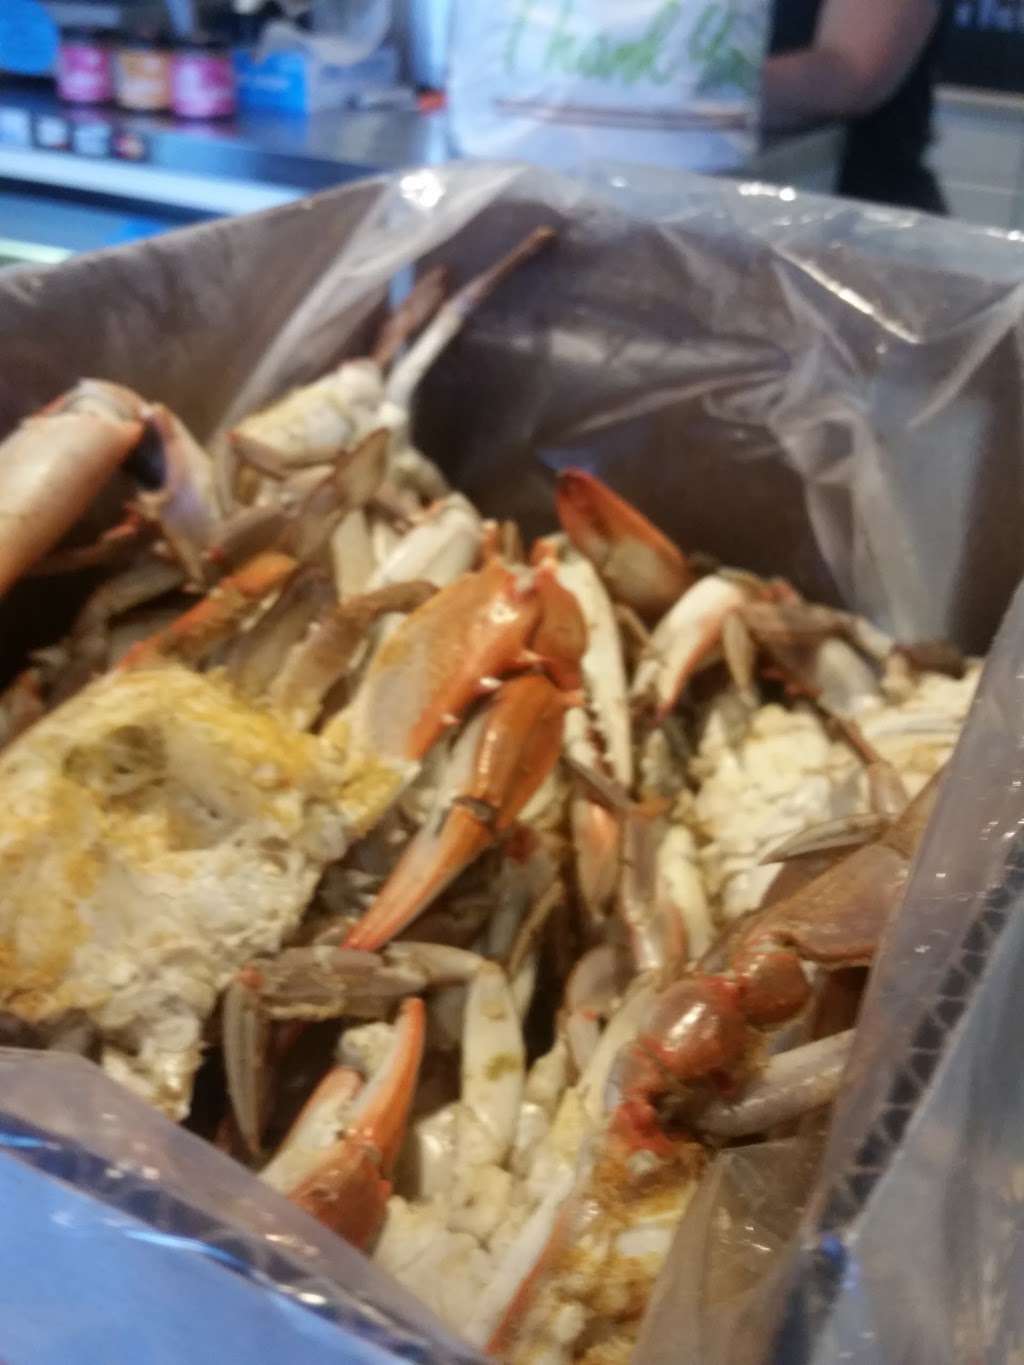 Shags Crab & Seafood | 9609, 1045 S Broadway, Pennsville, NJ 08070 | Phone: (856) 935-2826